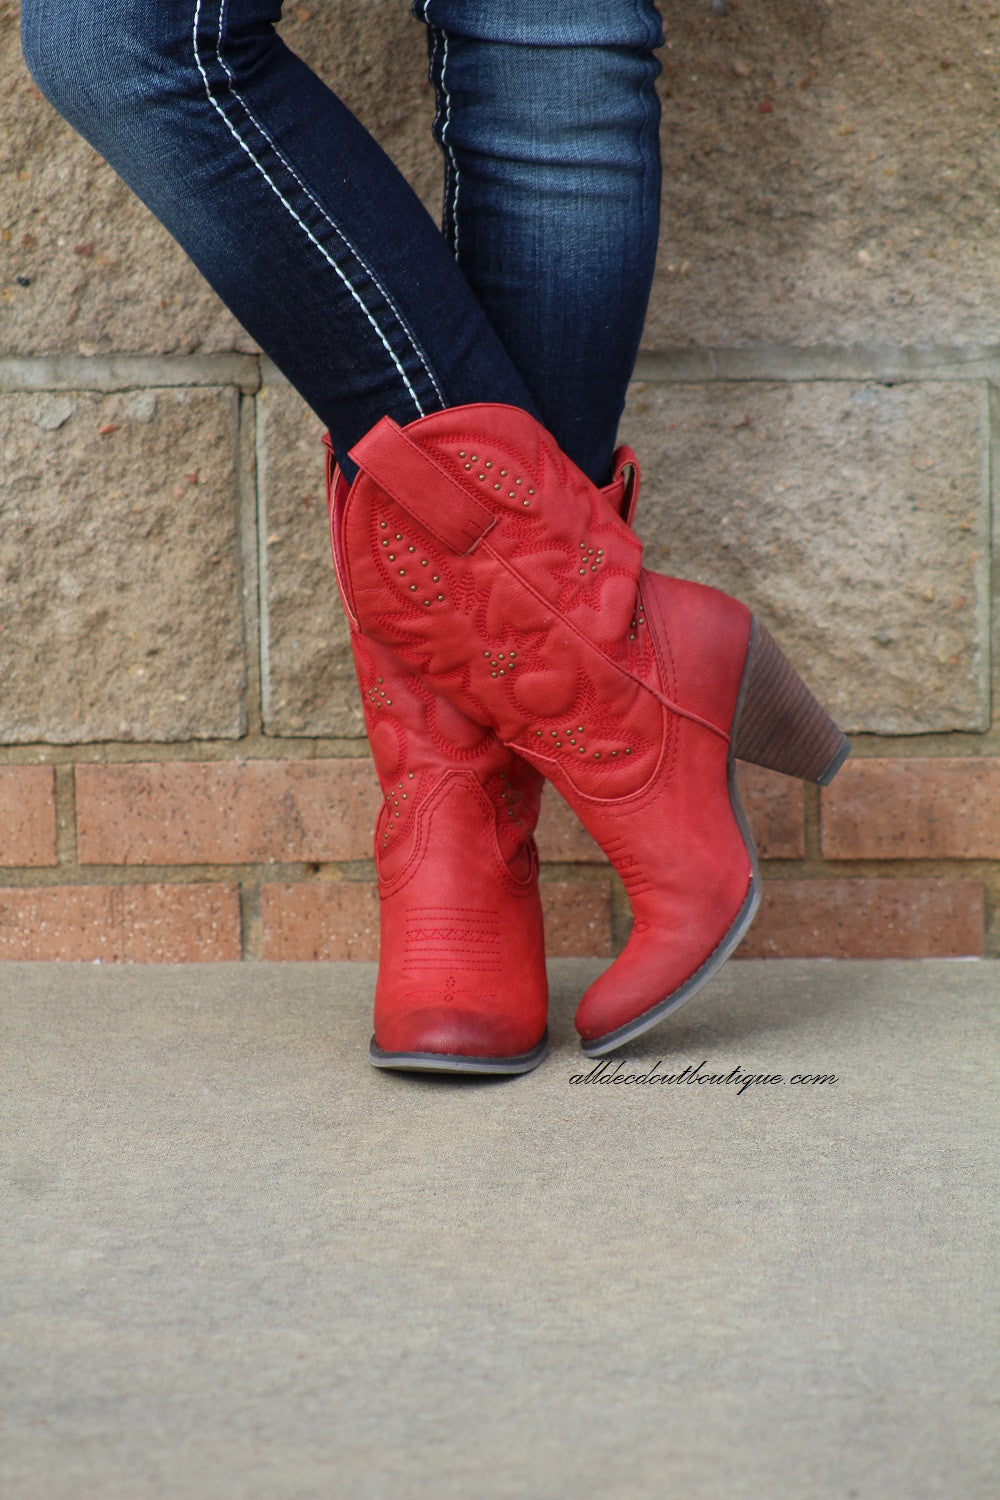 Fall Favorites Re-imagined  Womens cowgirl boots, Red cowboy boots, Red  cowgirl boots